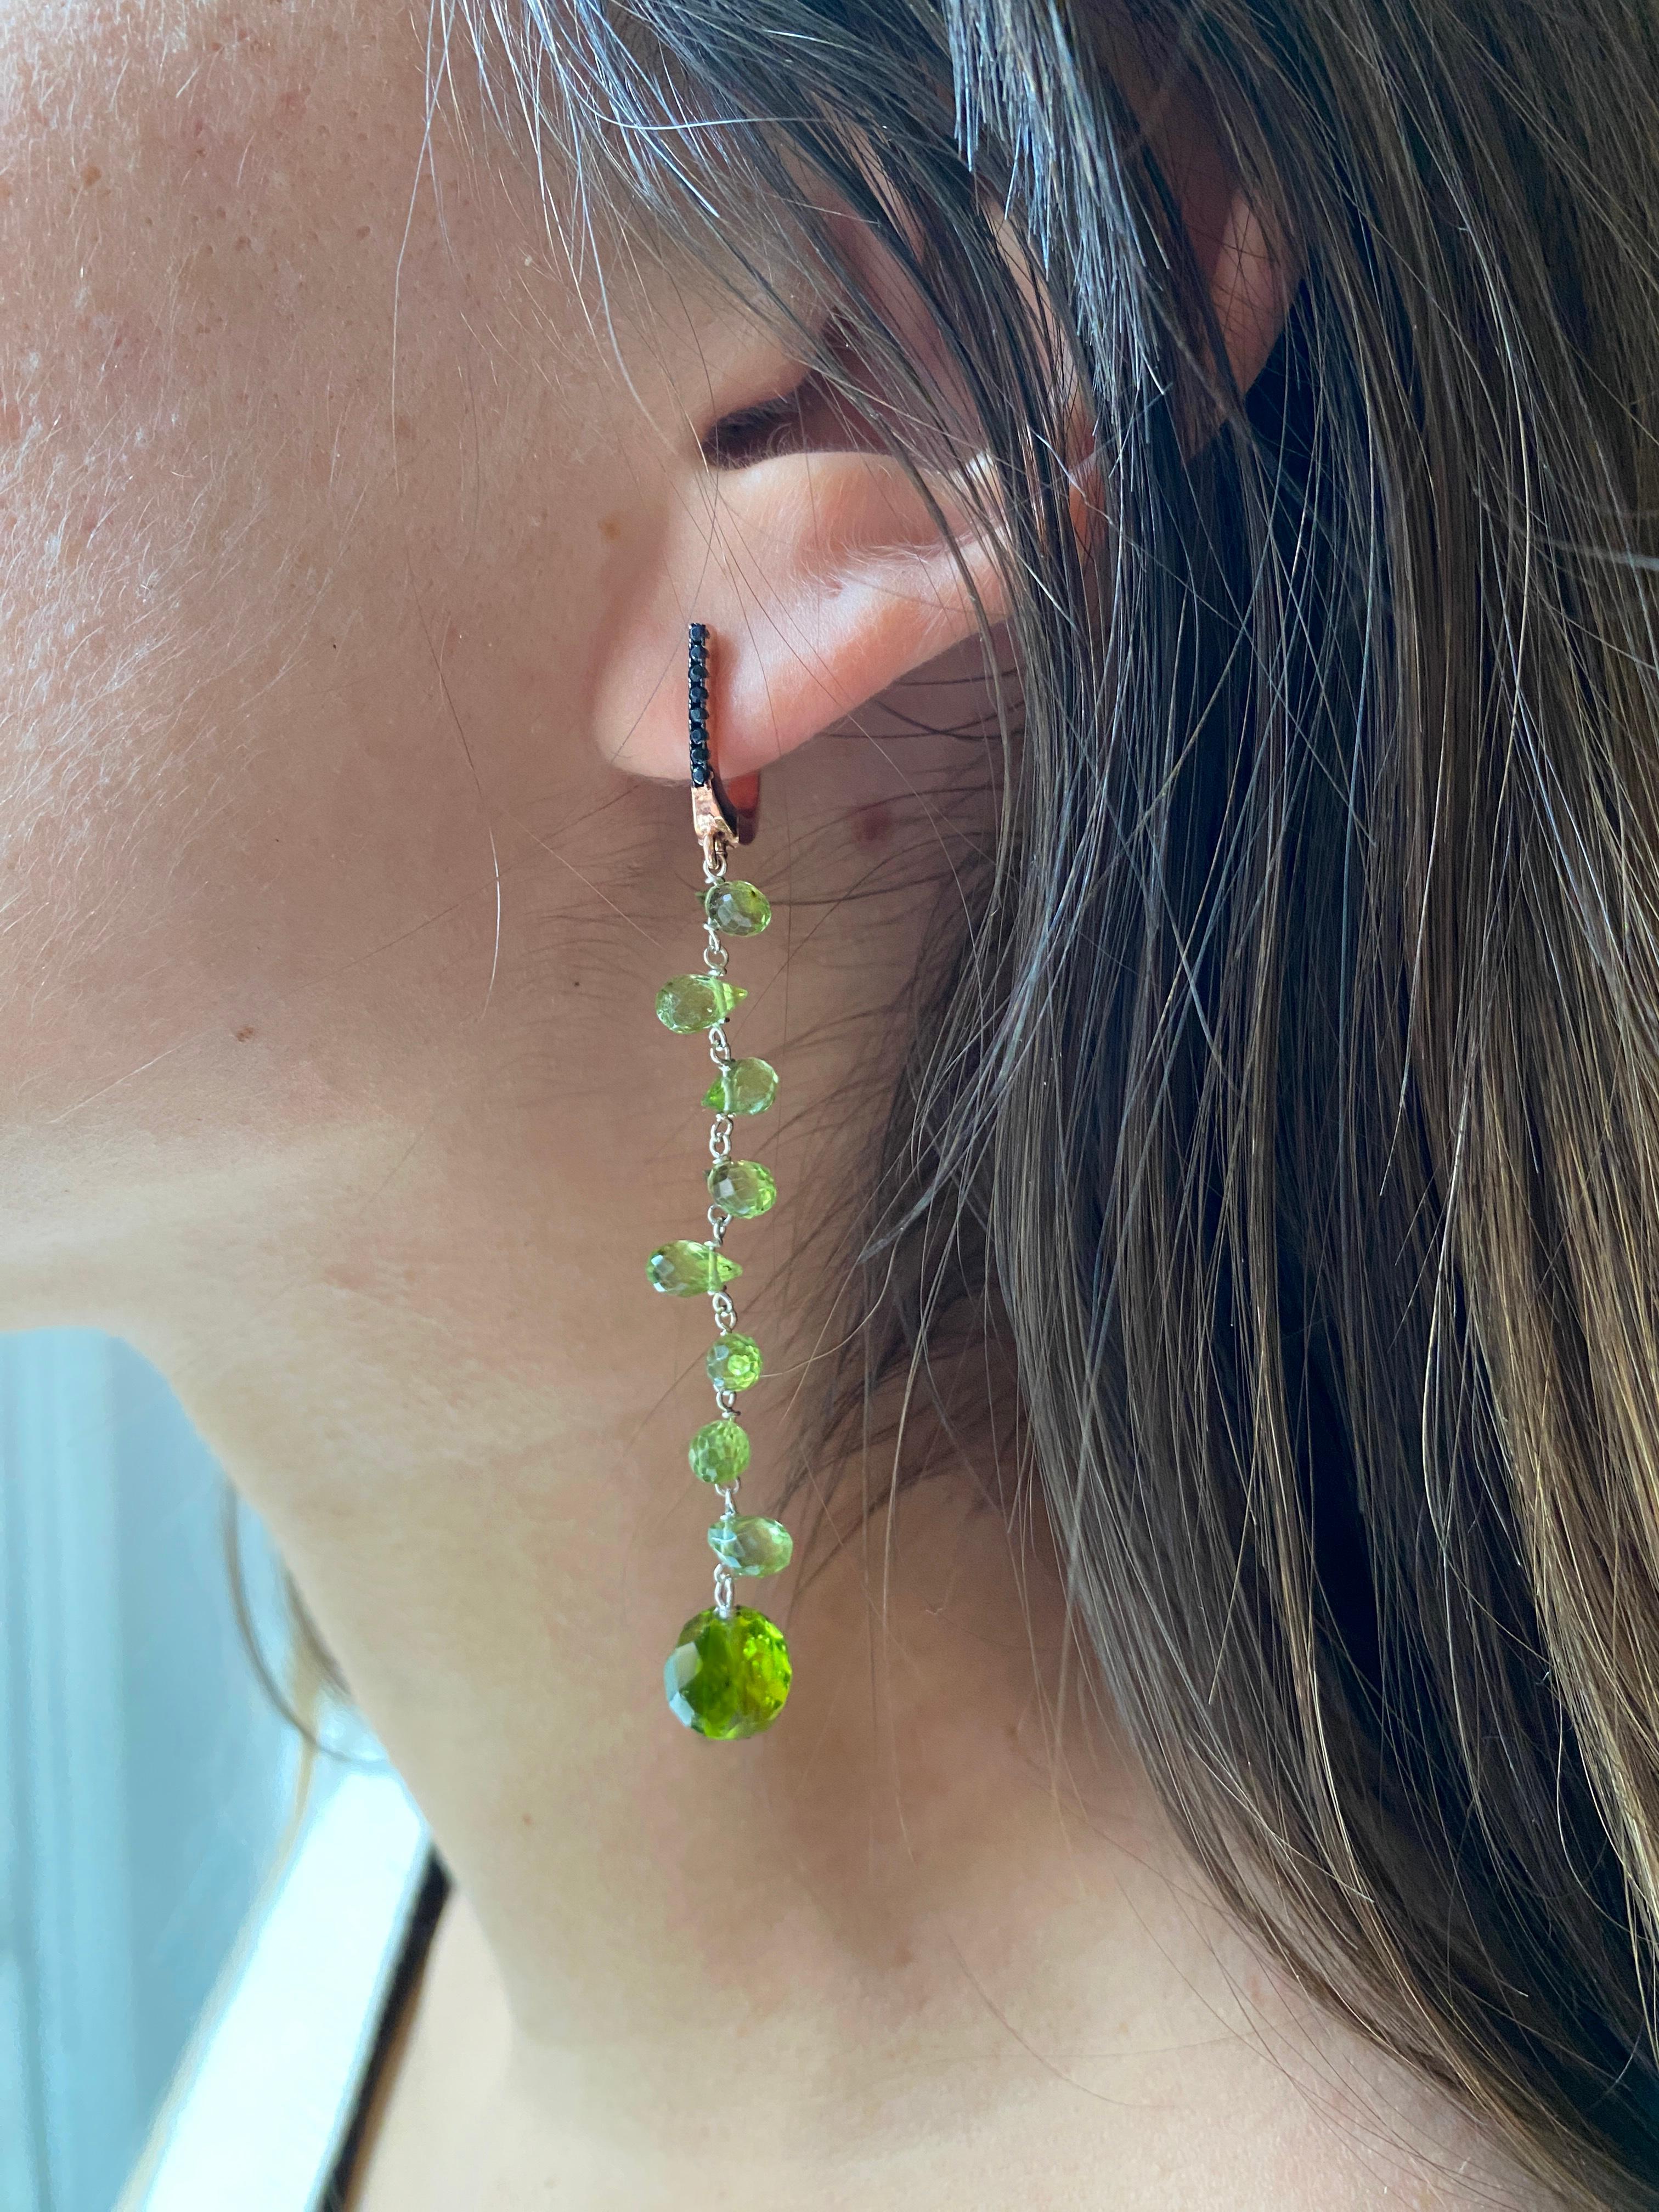 Romantic Handcrafted 18k Gold Earrings Black Diamonds and Peridot Drops Italian Made For Sale